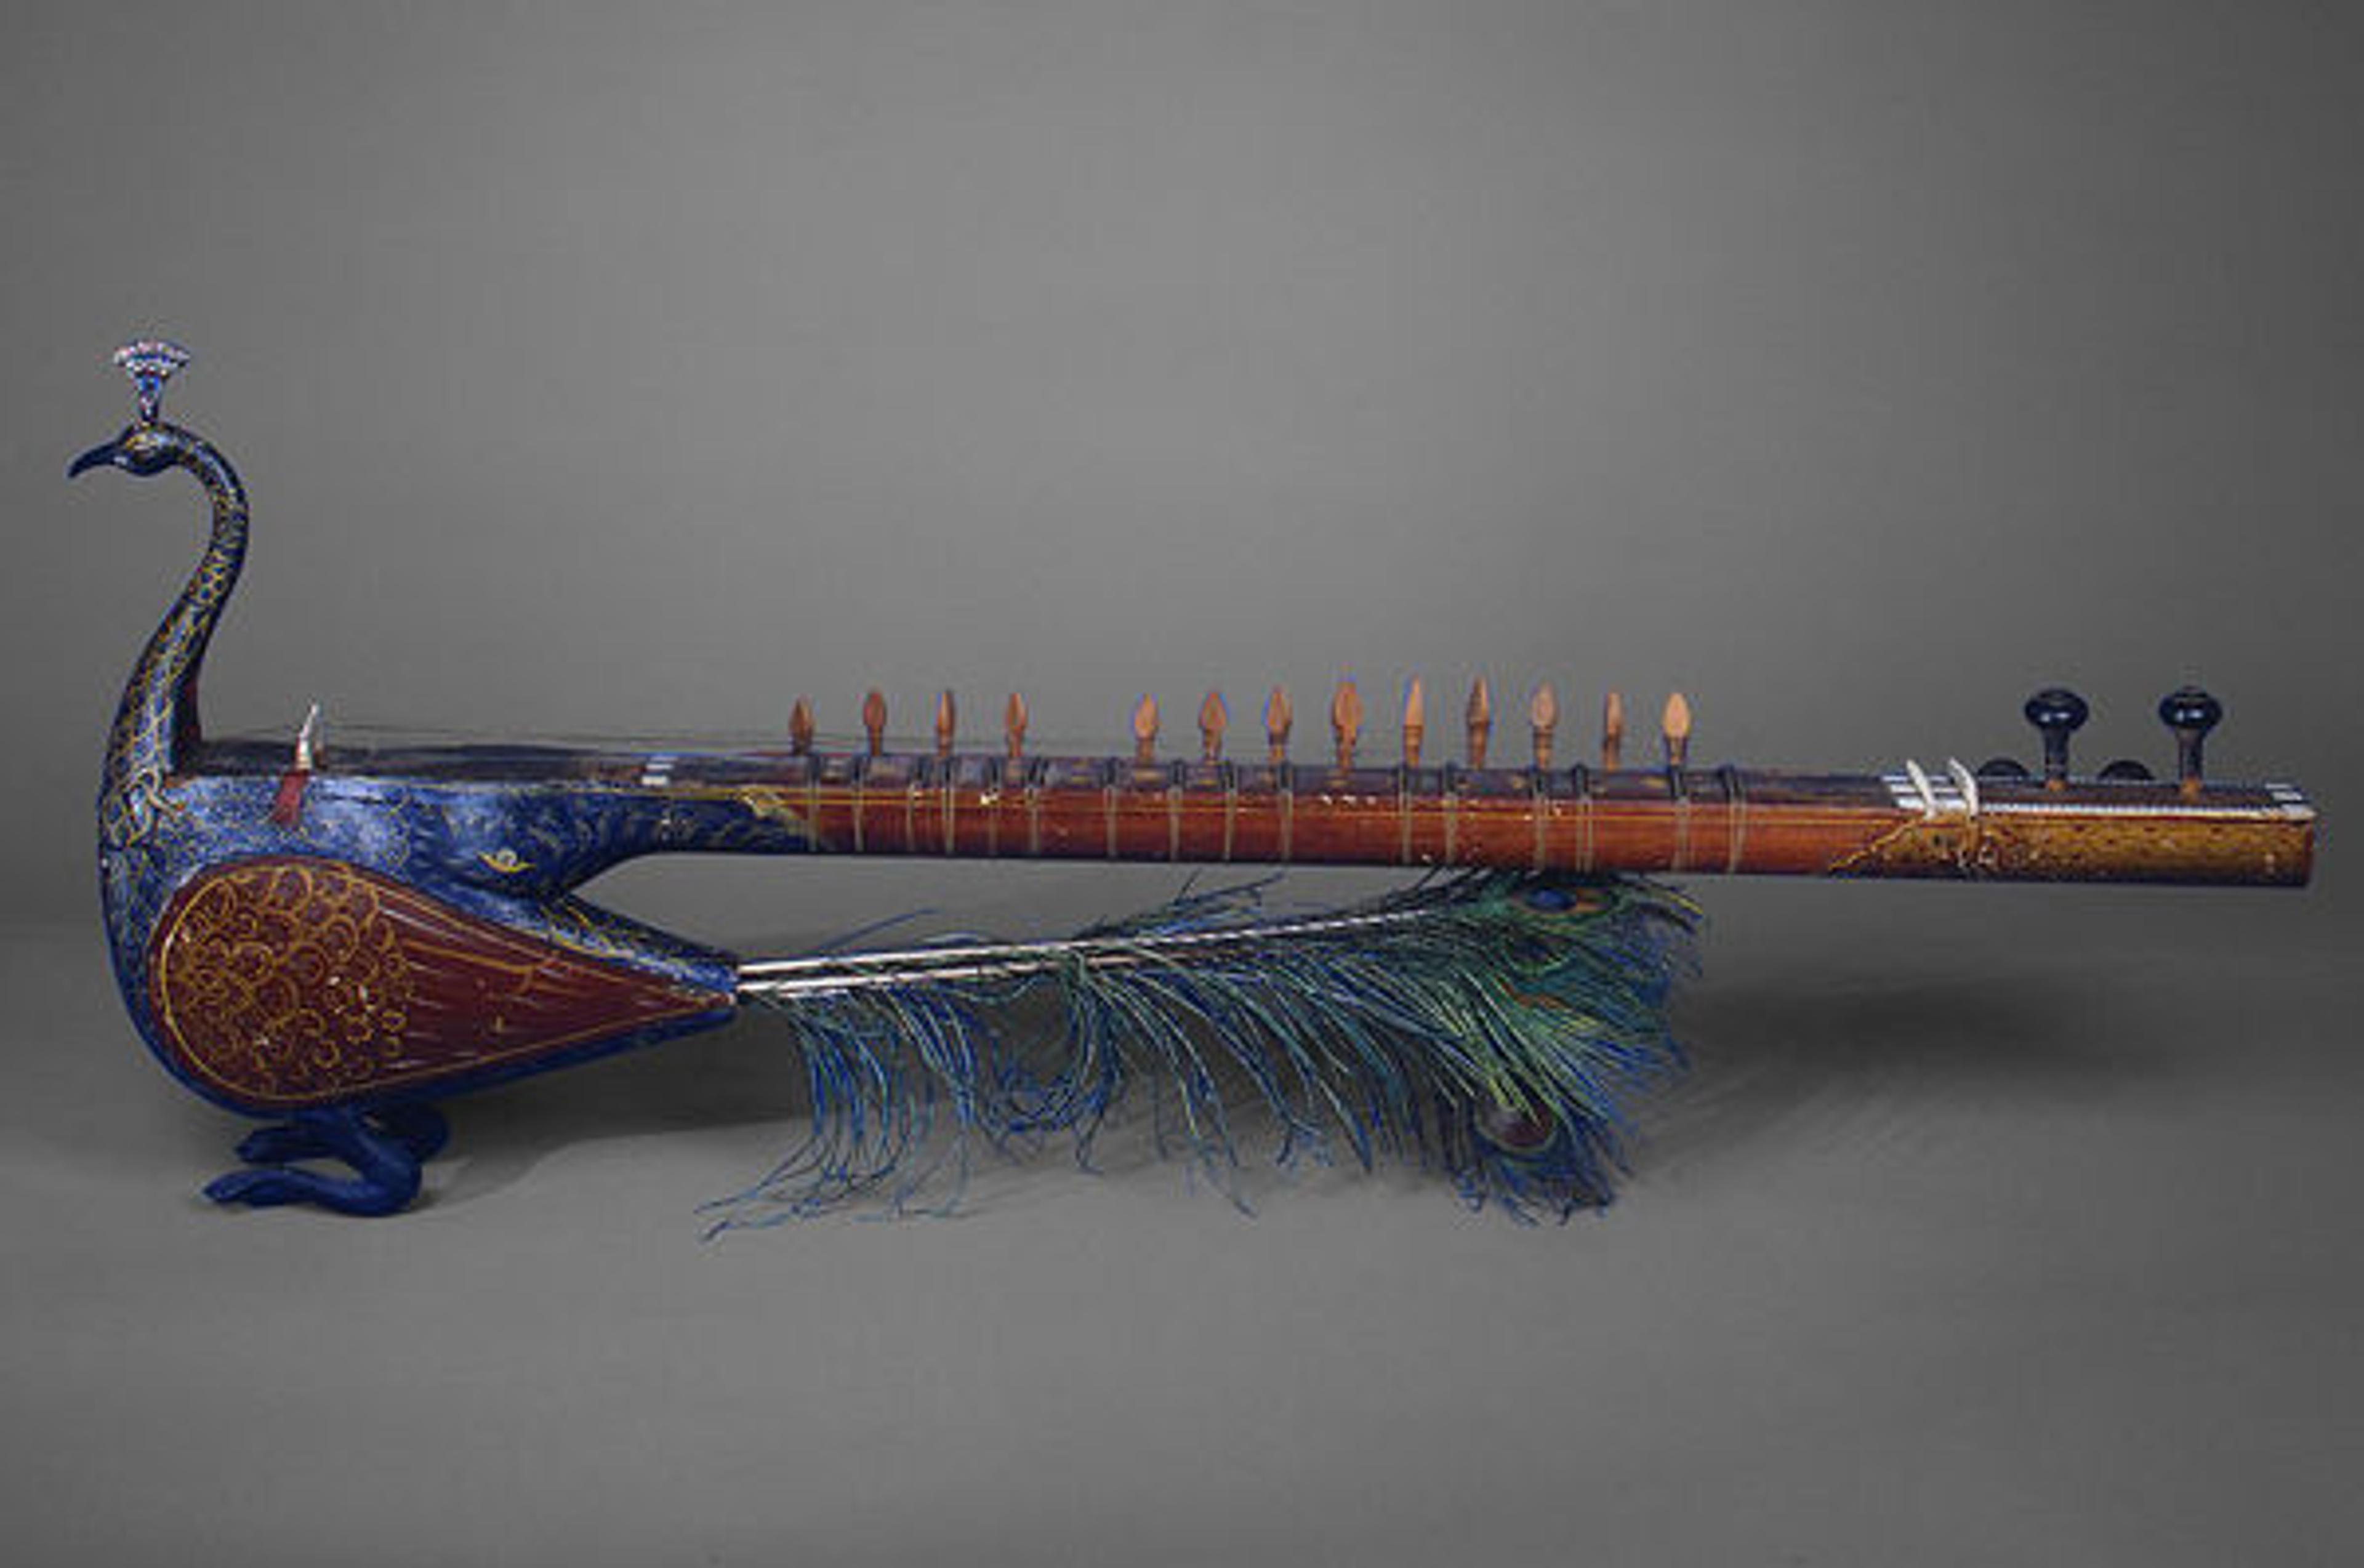 Mayuri. India, 19th century. The Metropolitan Museum of Art, New York, The Crosby Brown Collection of Musical Instruments, 1889 (89.4.163)